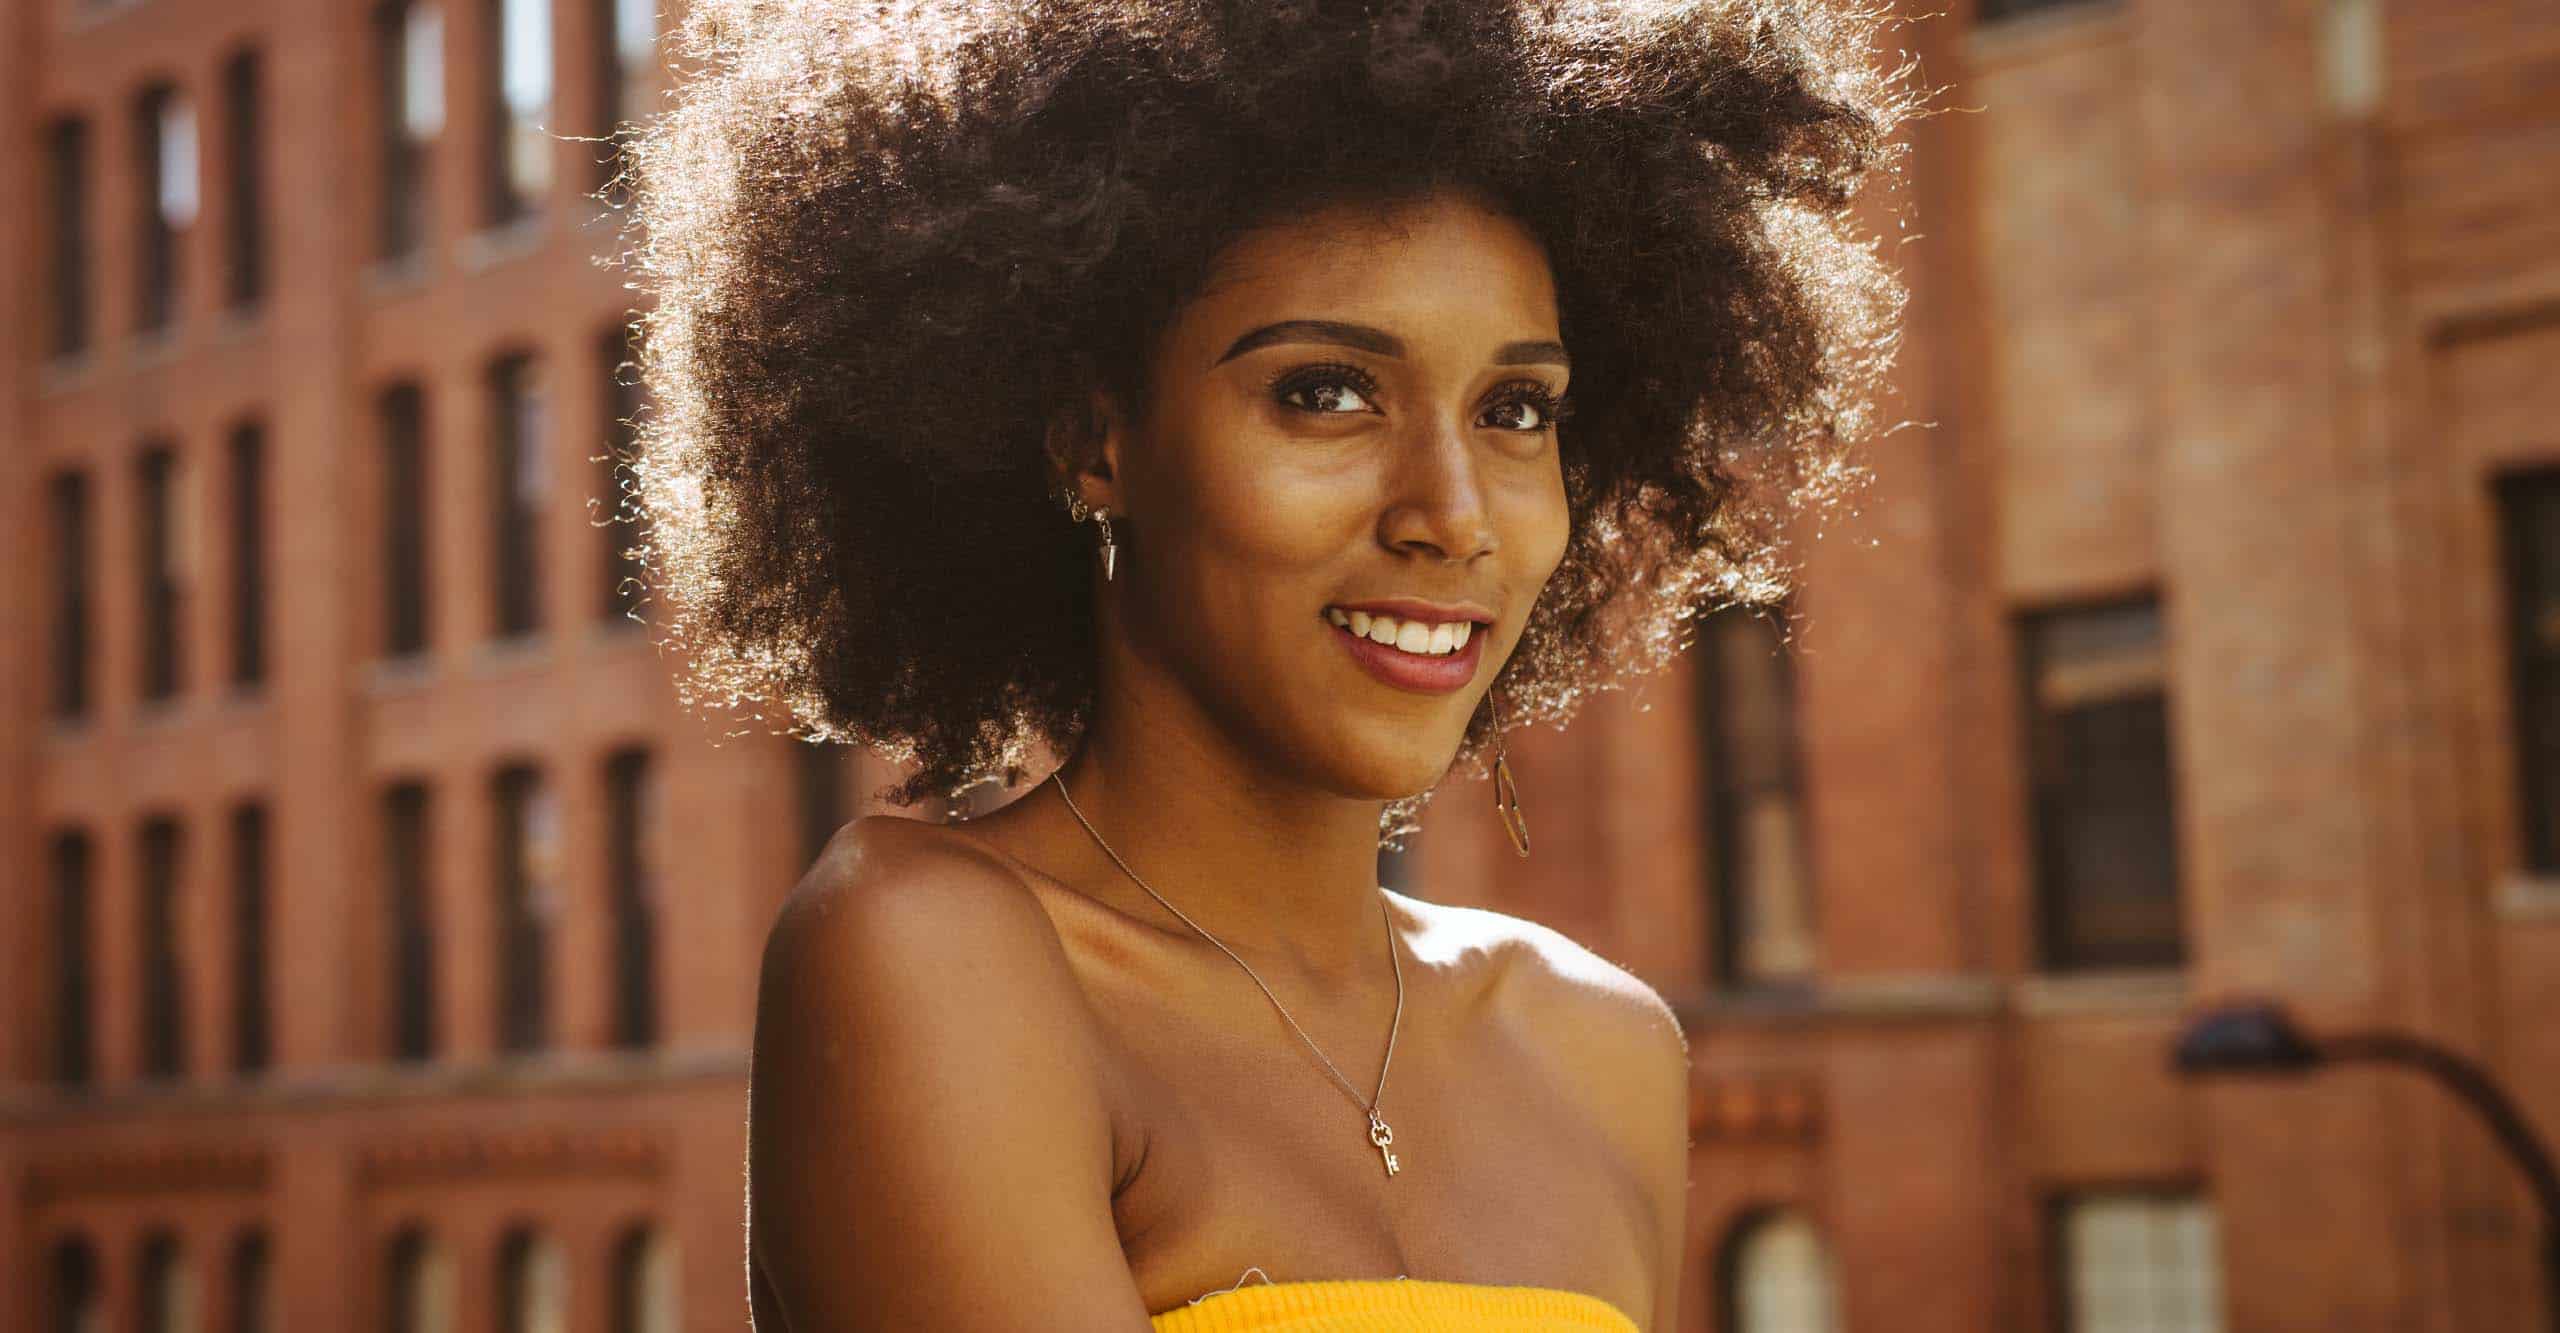 person with brunette natural hair walking in front a building, wearing a dainty necklace and yellow tube top